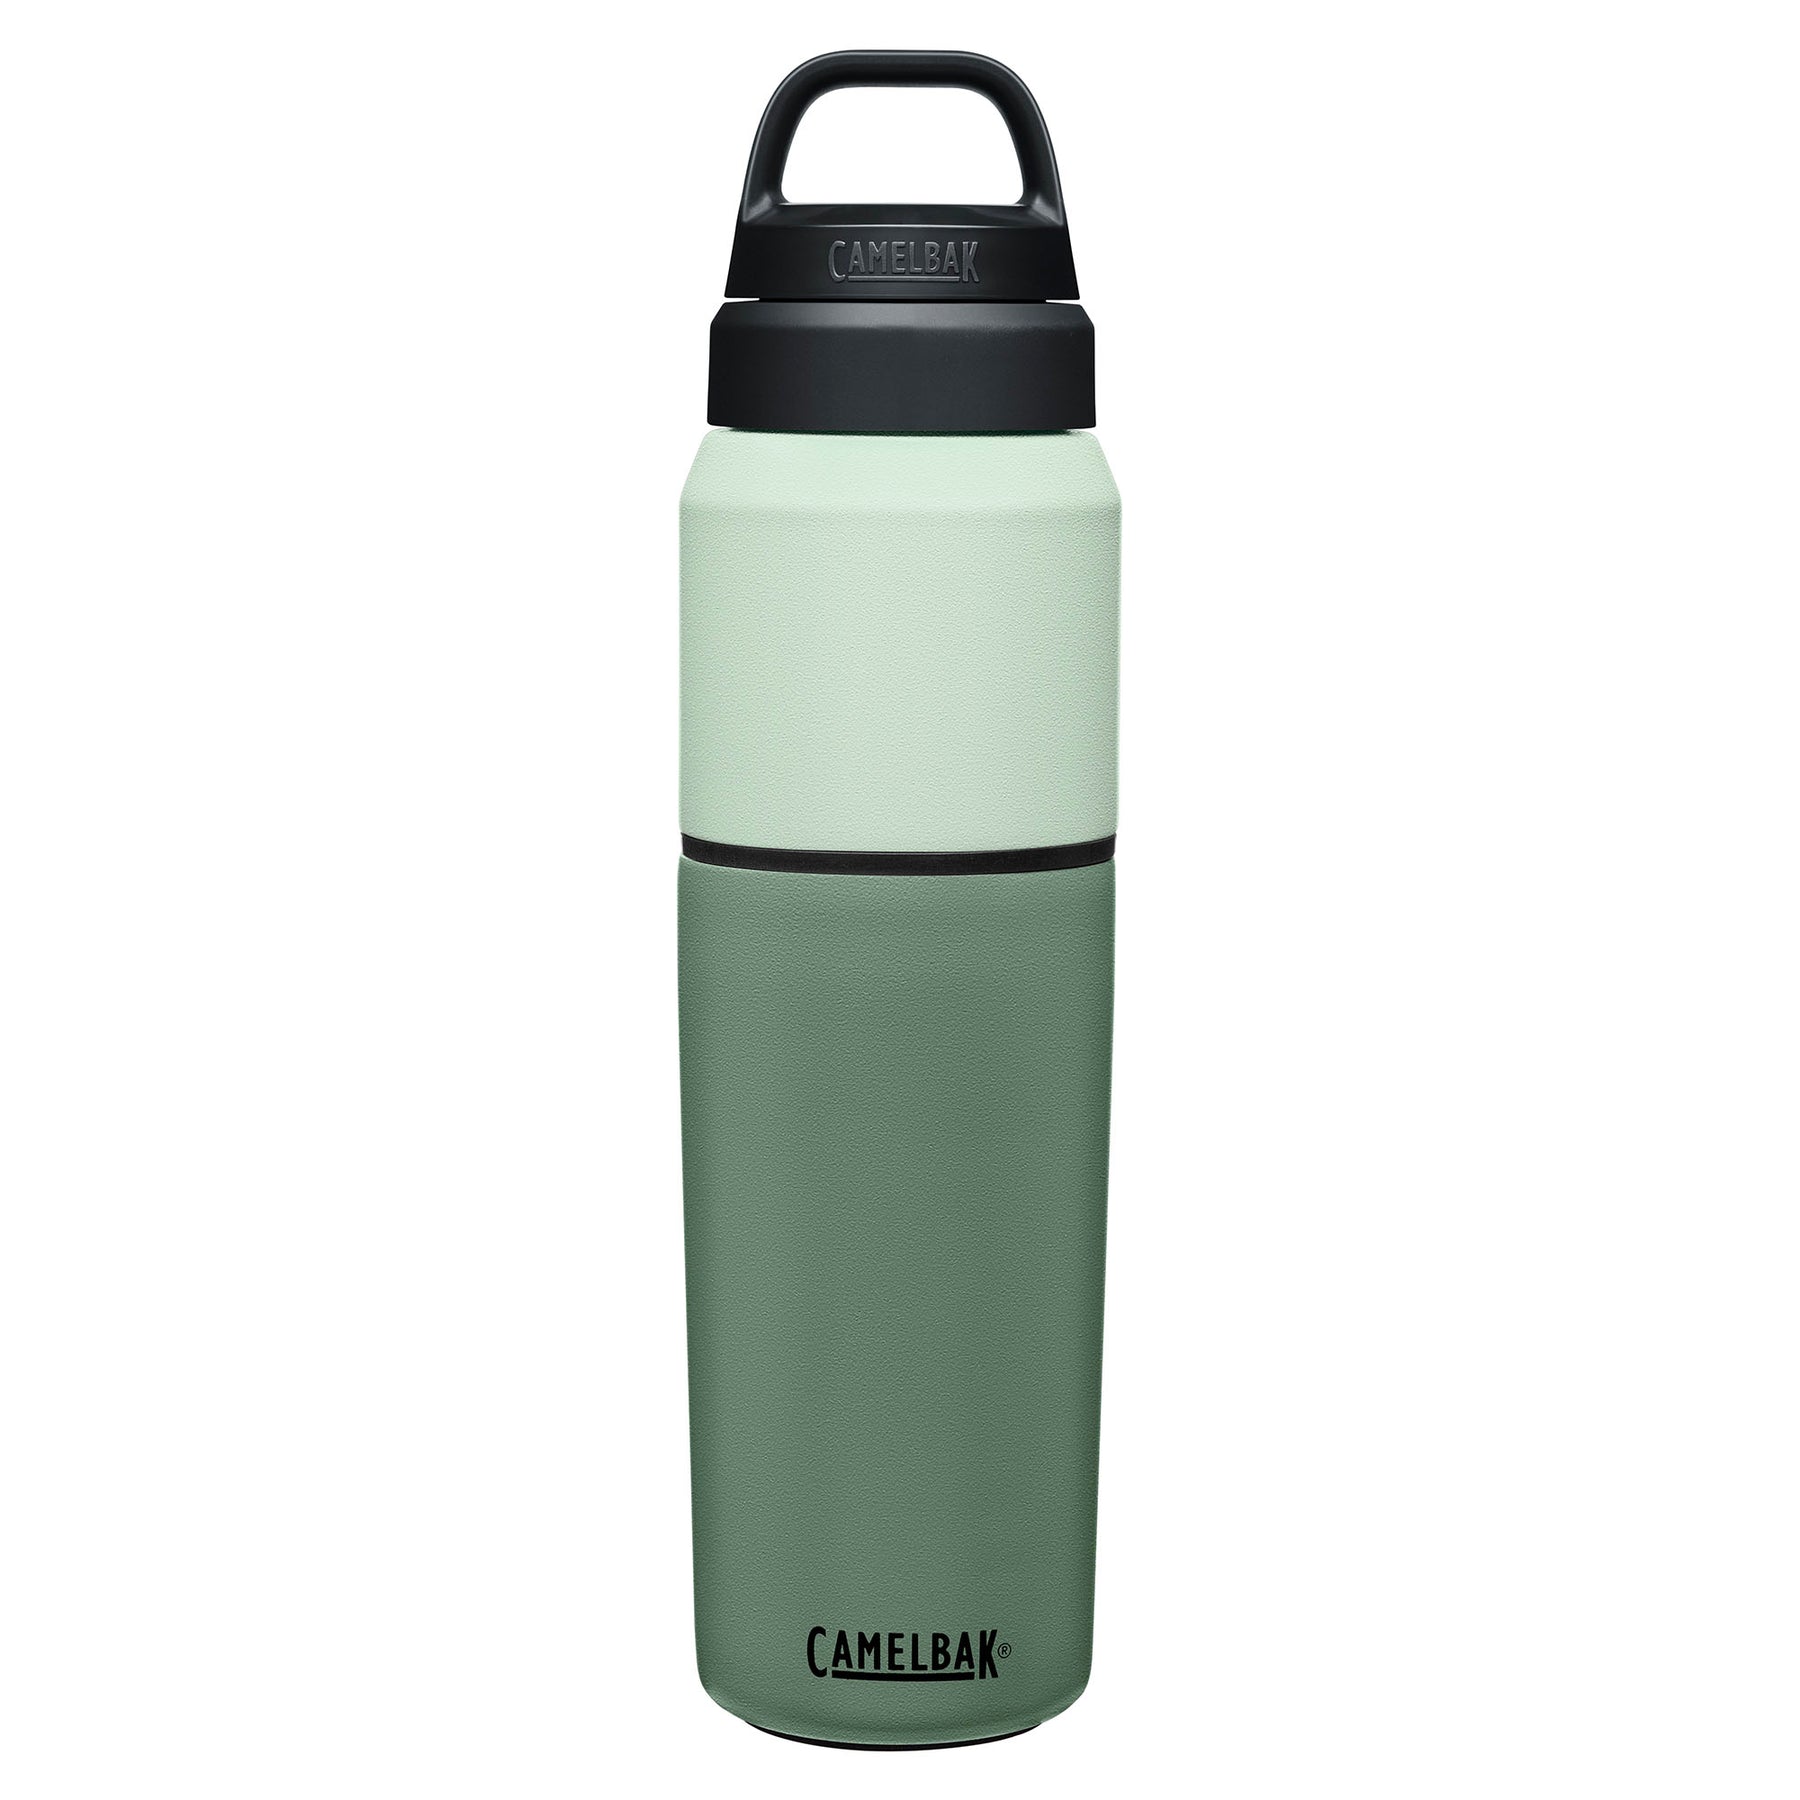 camelbak multibev sst vacuum insulated 650ml bottle with 480ml cup Moss/Mint 650ml